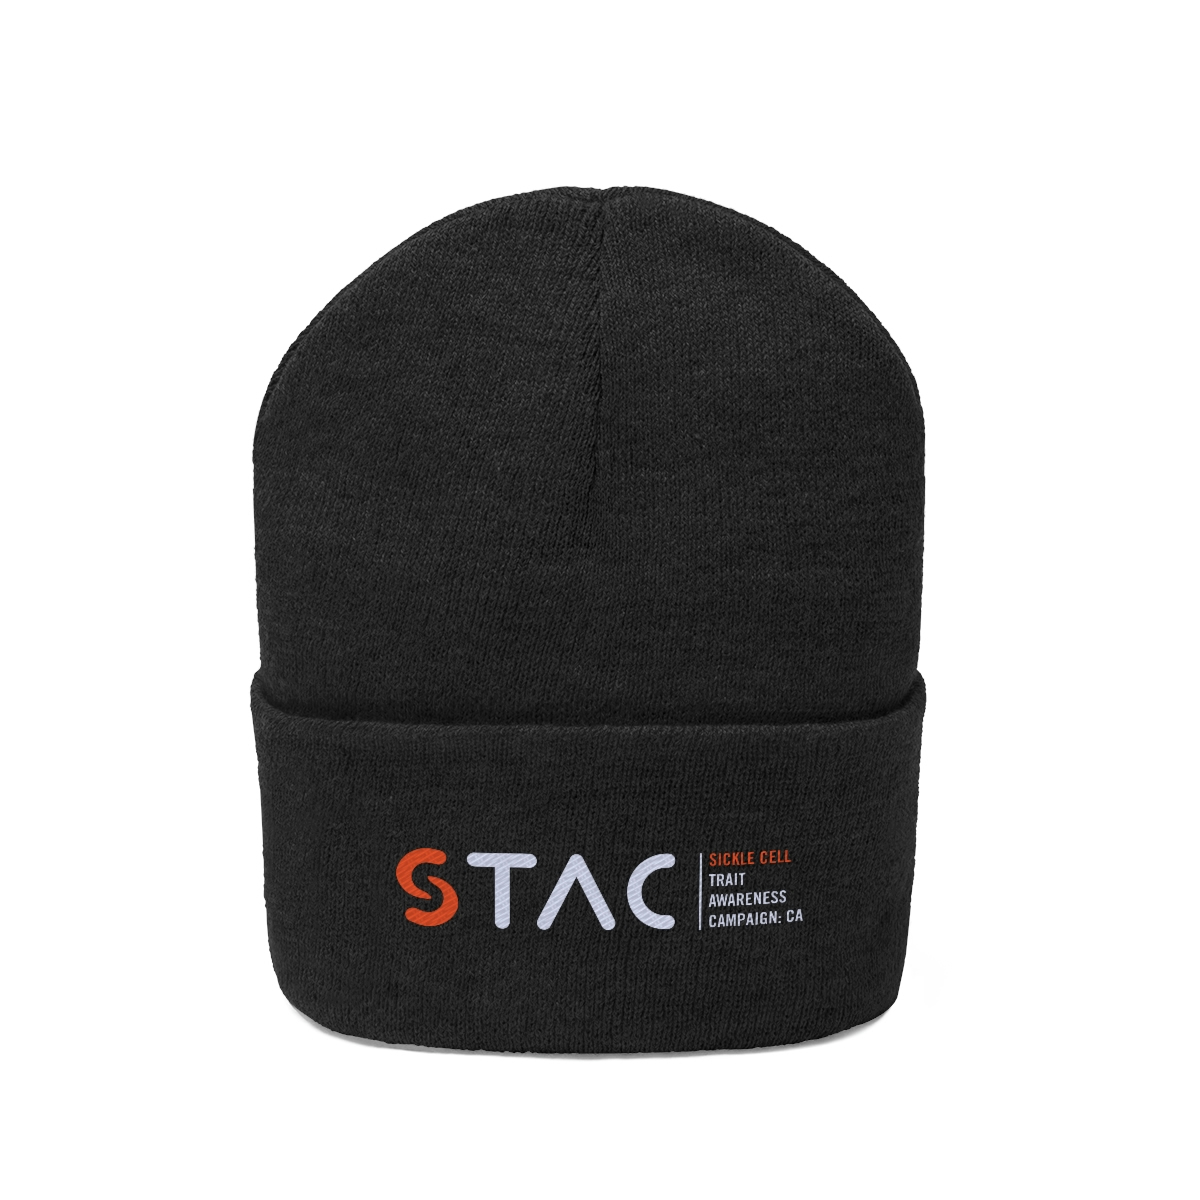 Front view of dark ash colored beanie-style knit hat with the STAC logo embroidered on the folded area.